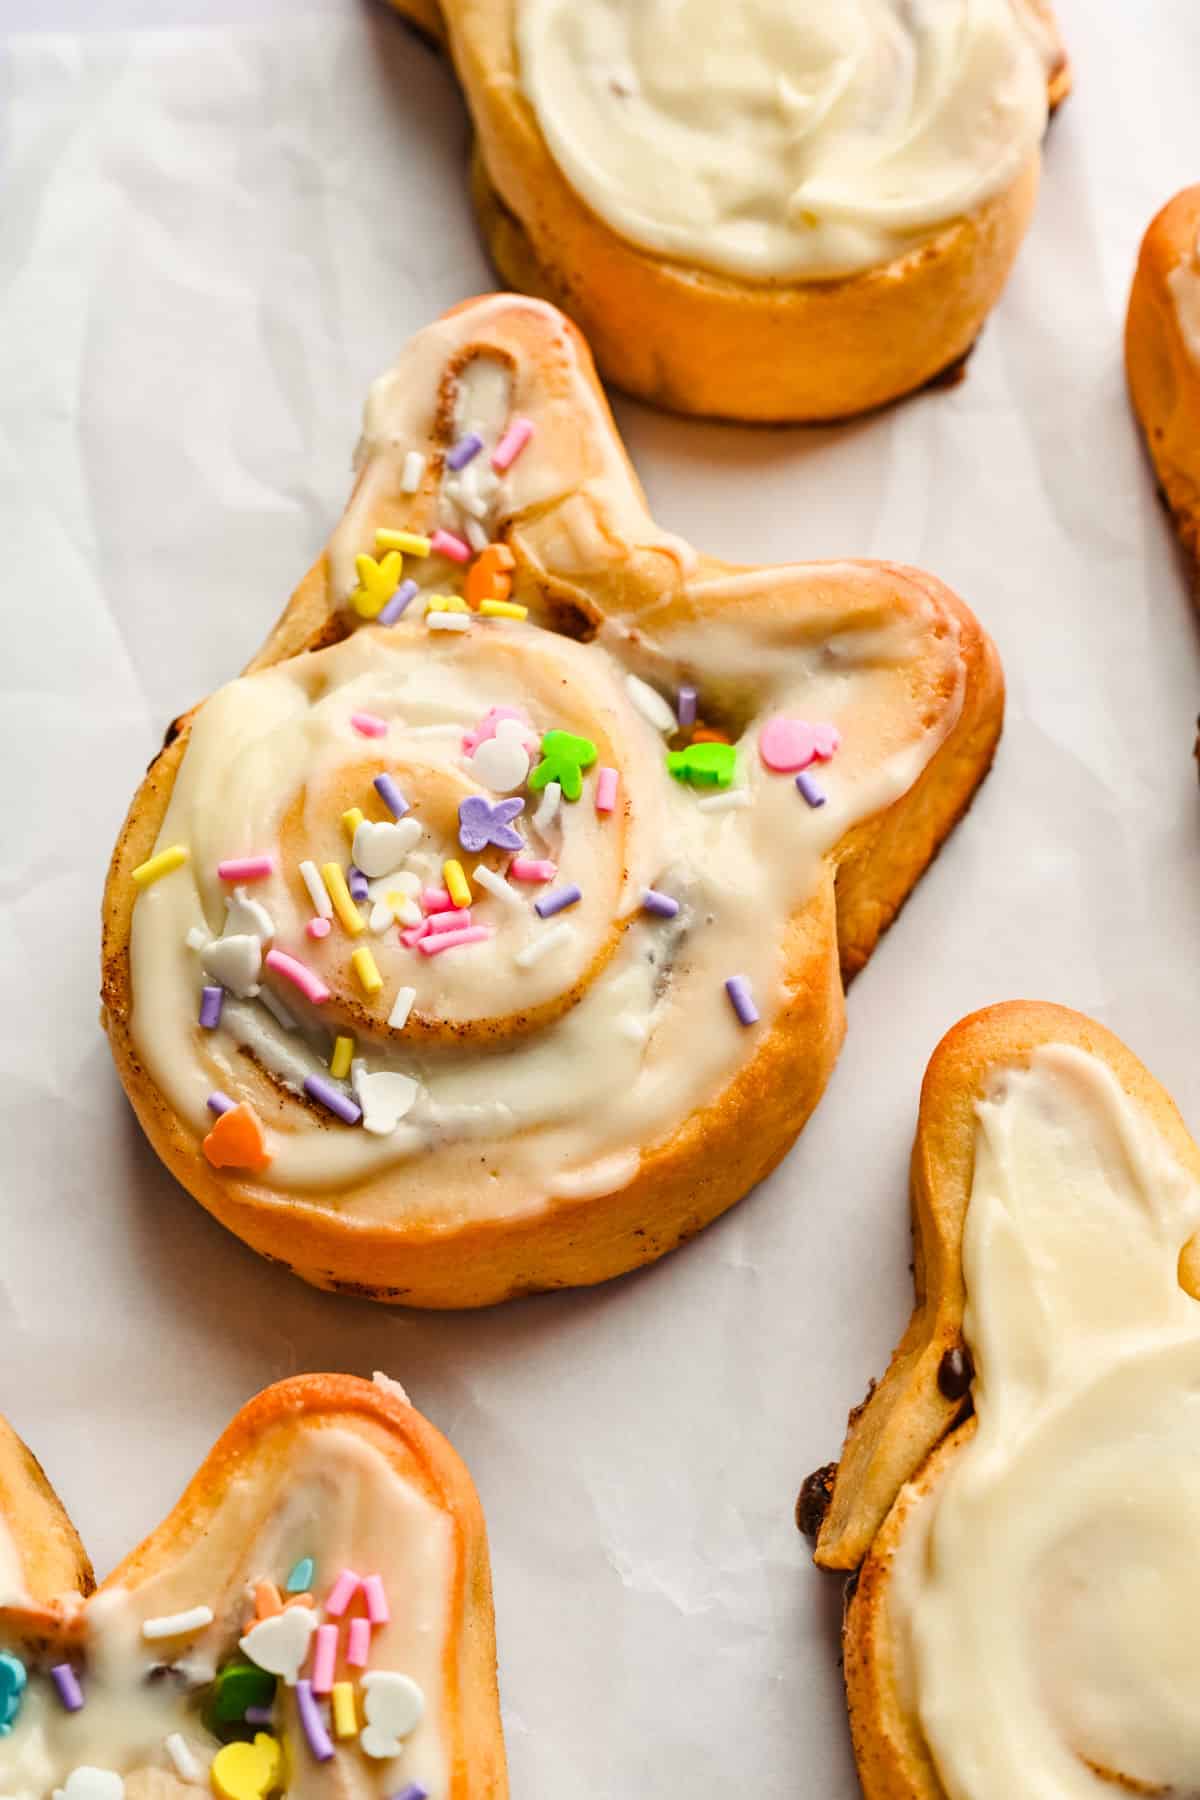 An Easter bunny cinnamon roll topped with Easter sprinkles.